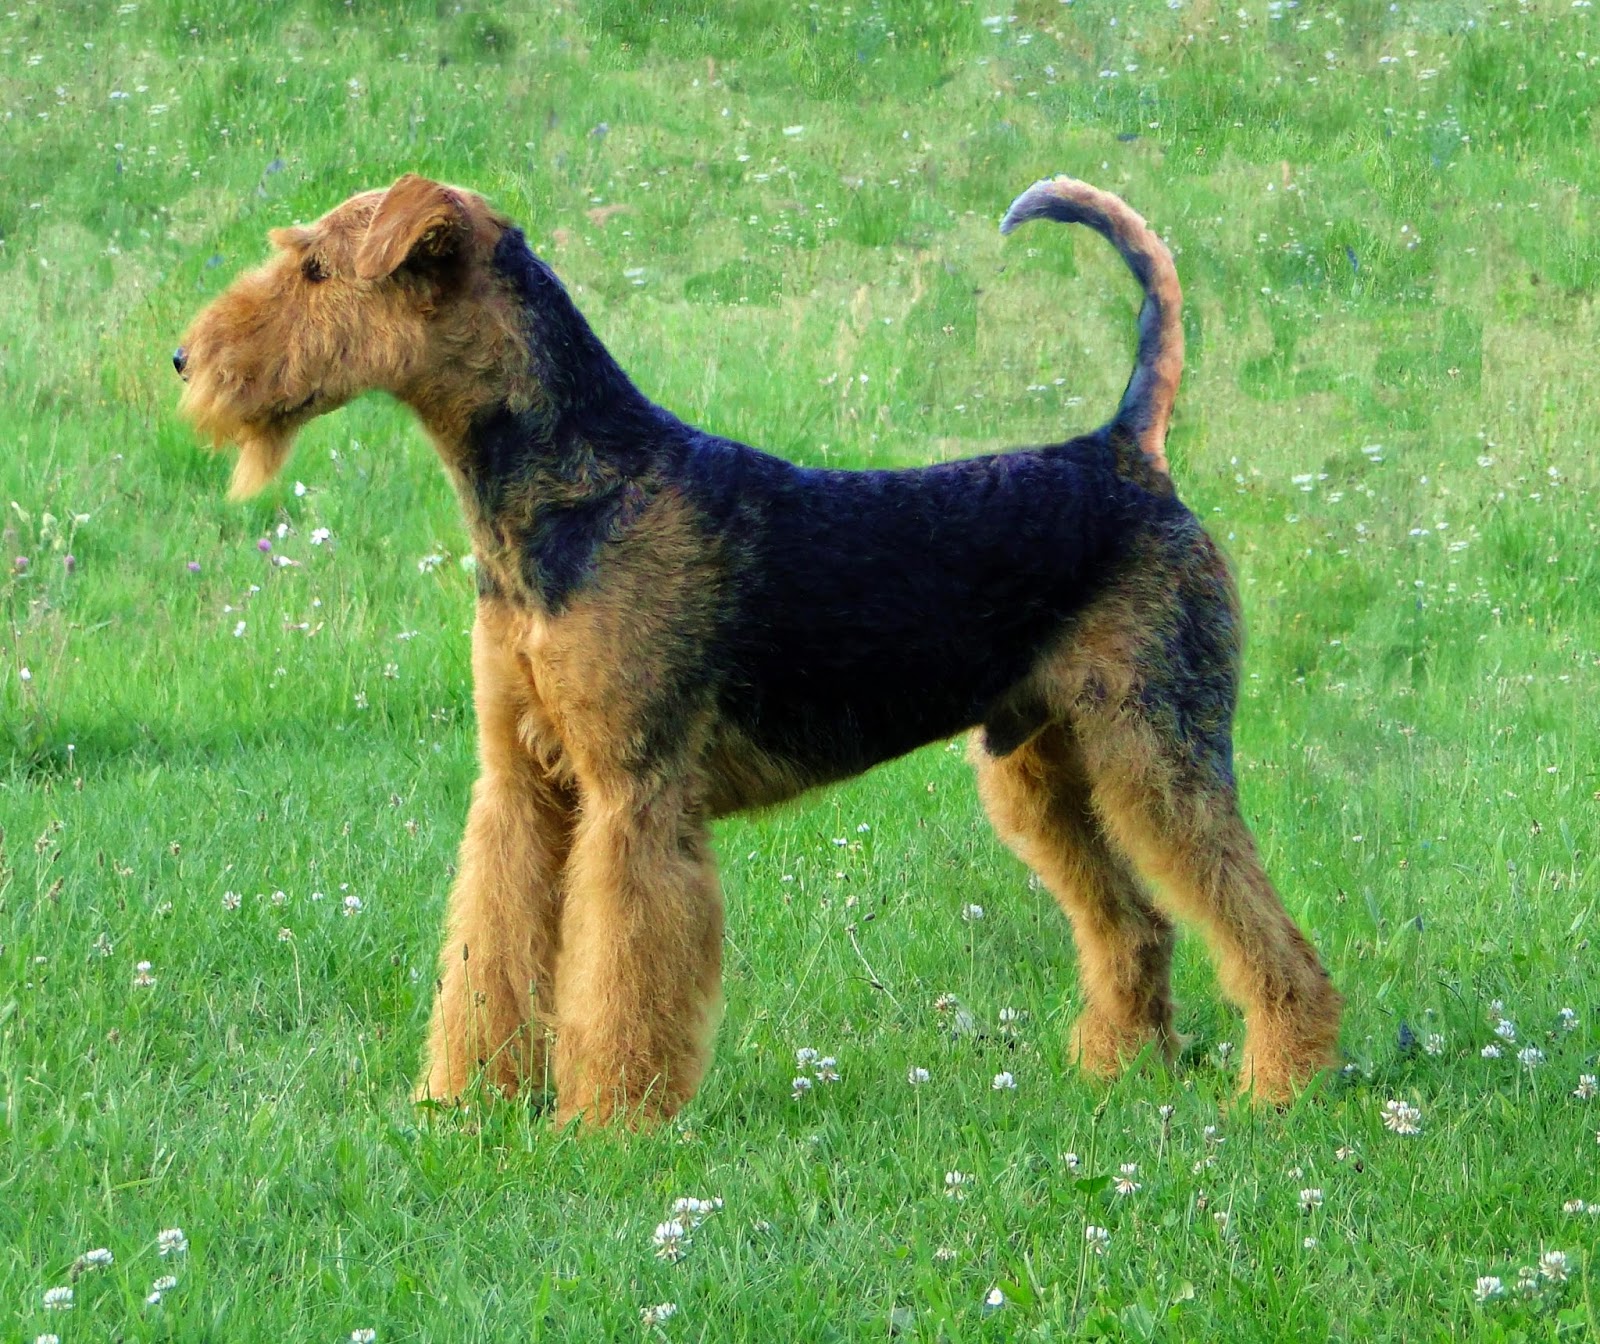 The Animal: Airedale Terrier Dog